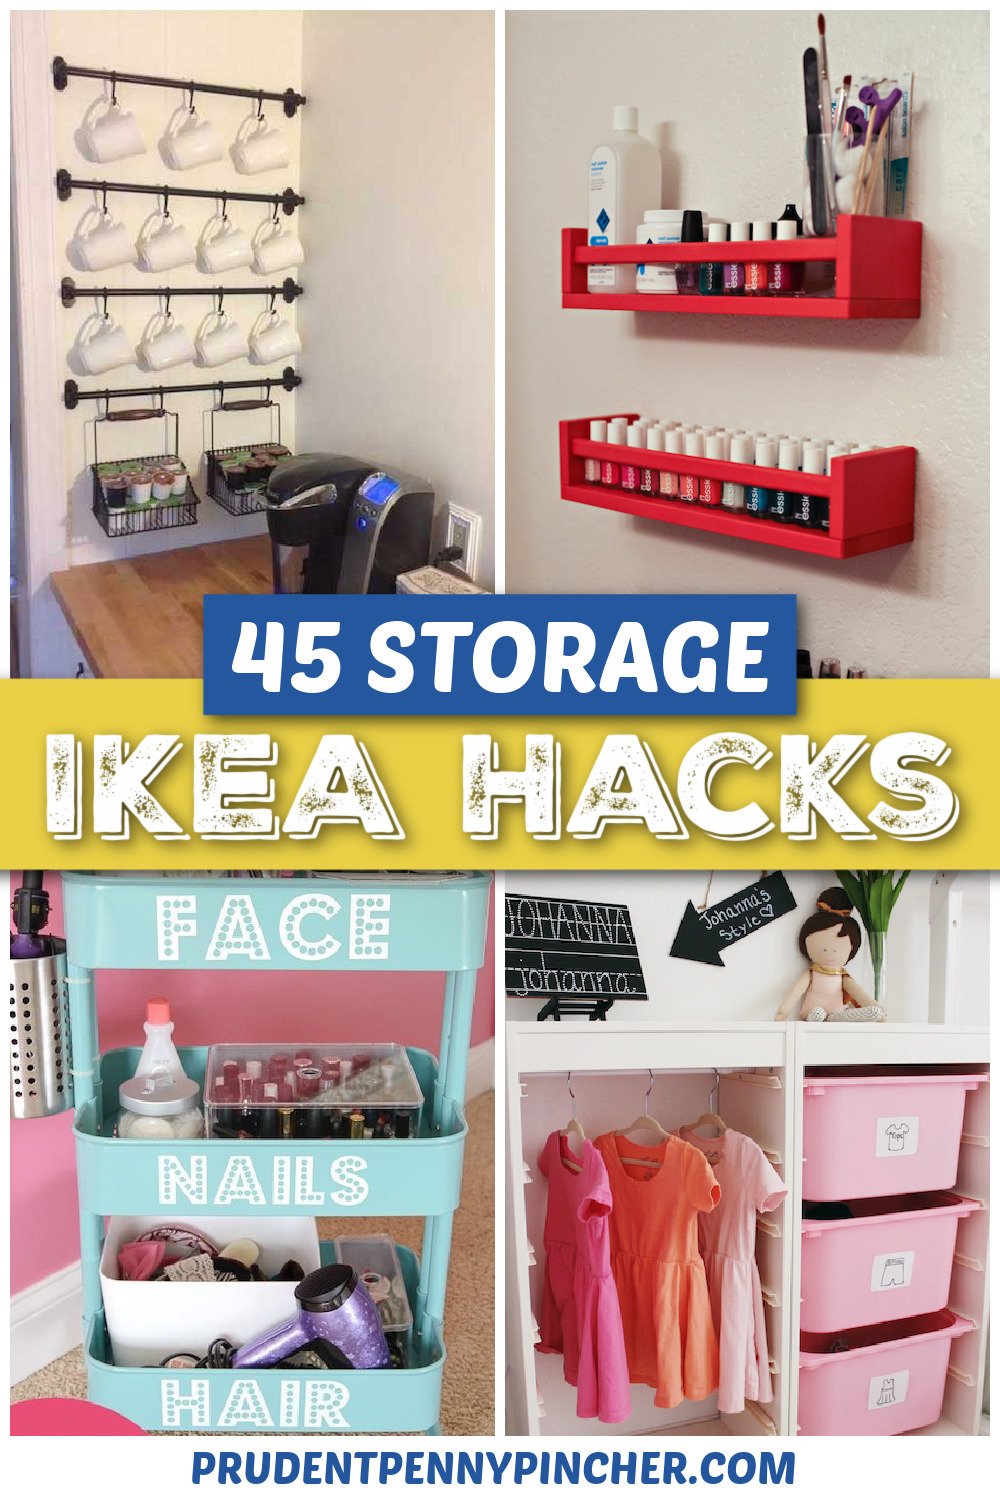 Diy Organization And Storage Ikea S, Closet Organizer With Drawers And Shelves Ikea